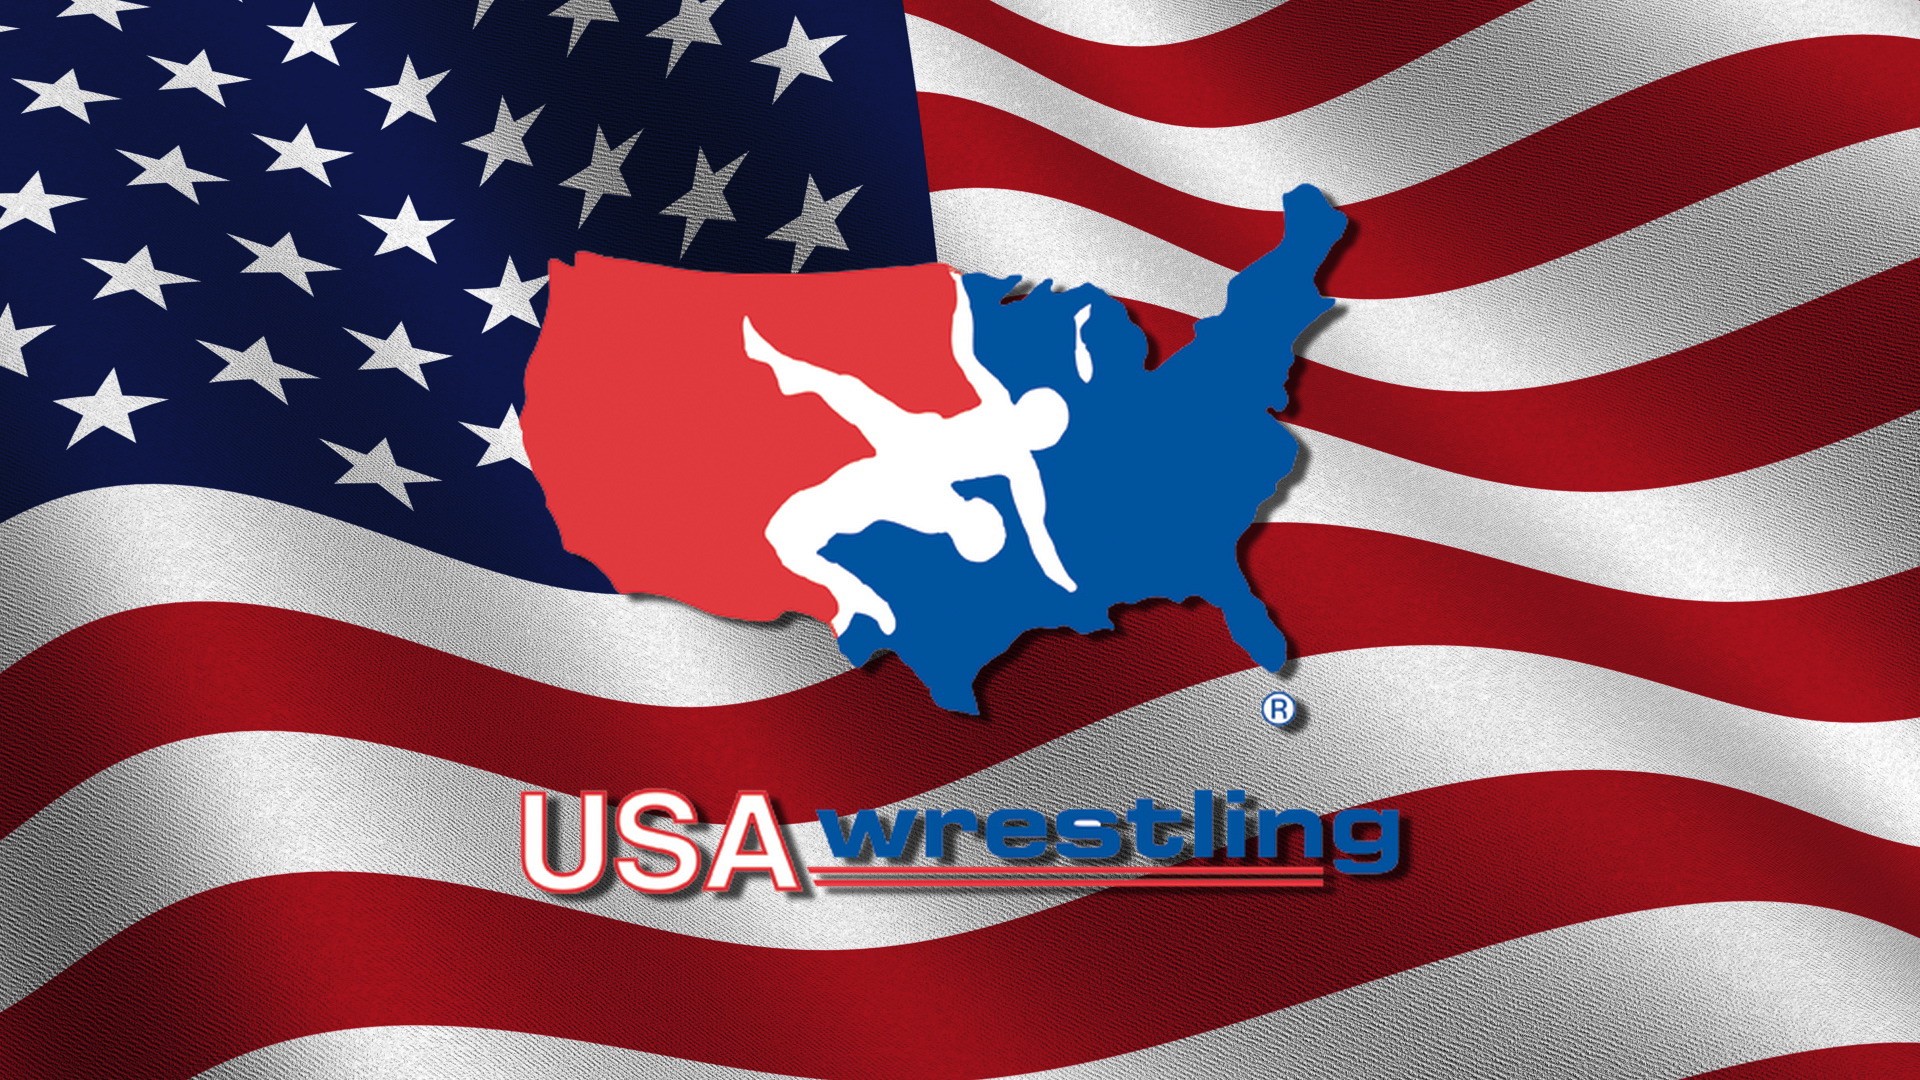 49 Usa Wrestling Wallpapers On Wallpapersafari We hope you enjoy our variety and growing collection of hd images to use as a background or. usa wrestling wallpapers on wallpapersafari